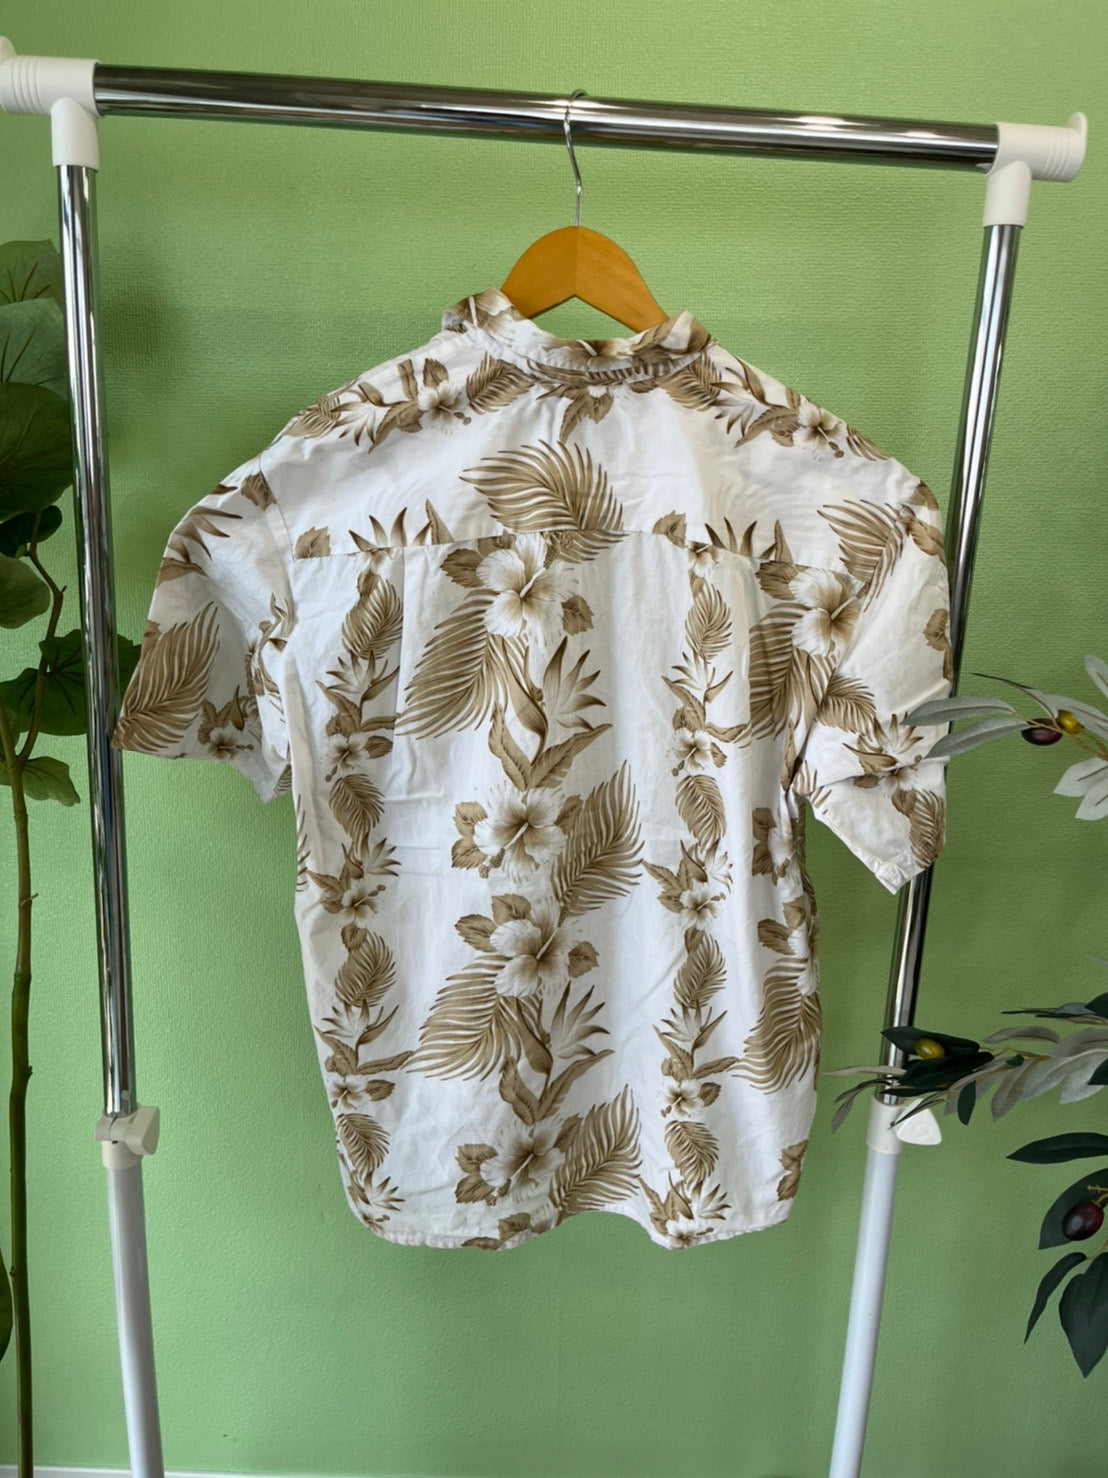 【Paradise】All Over Pattan Cotton Aloha Shirt Designed in hawaii 総柄 リーフ柄 アロハシャツ (men's L)